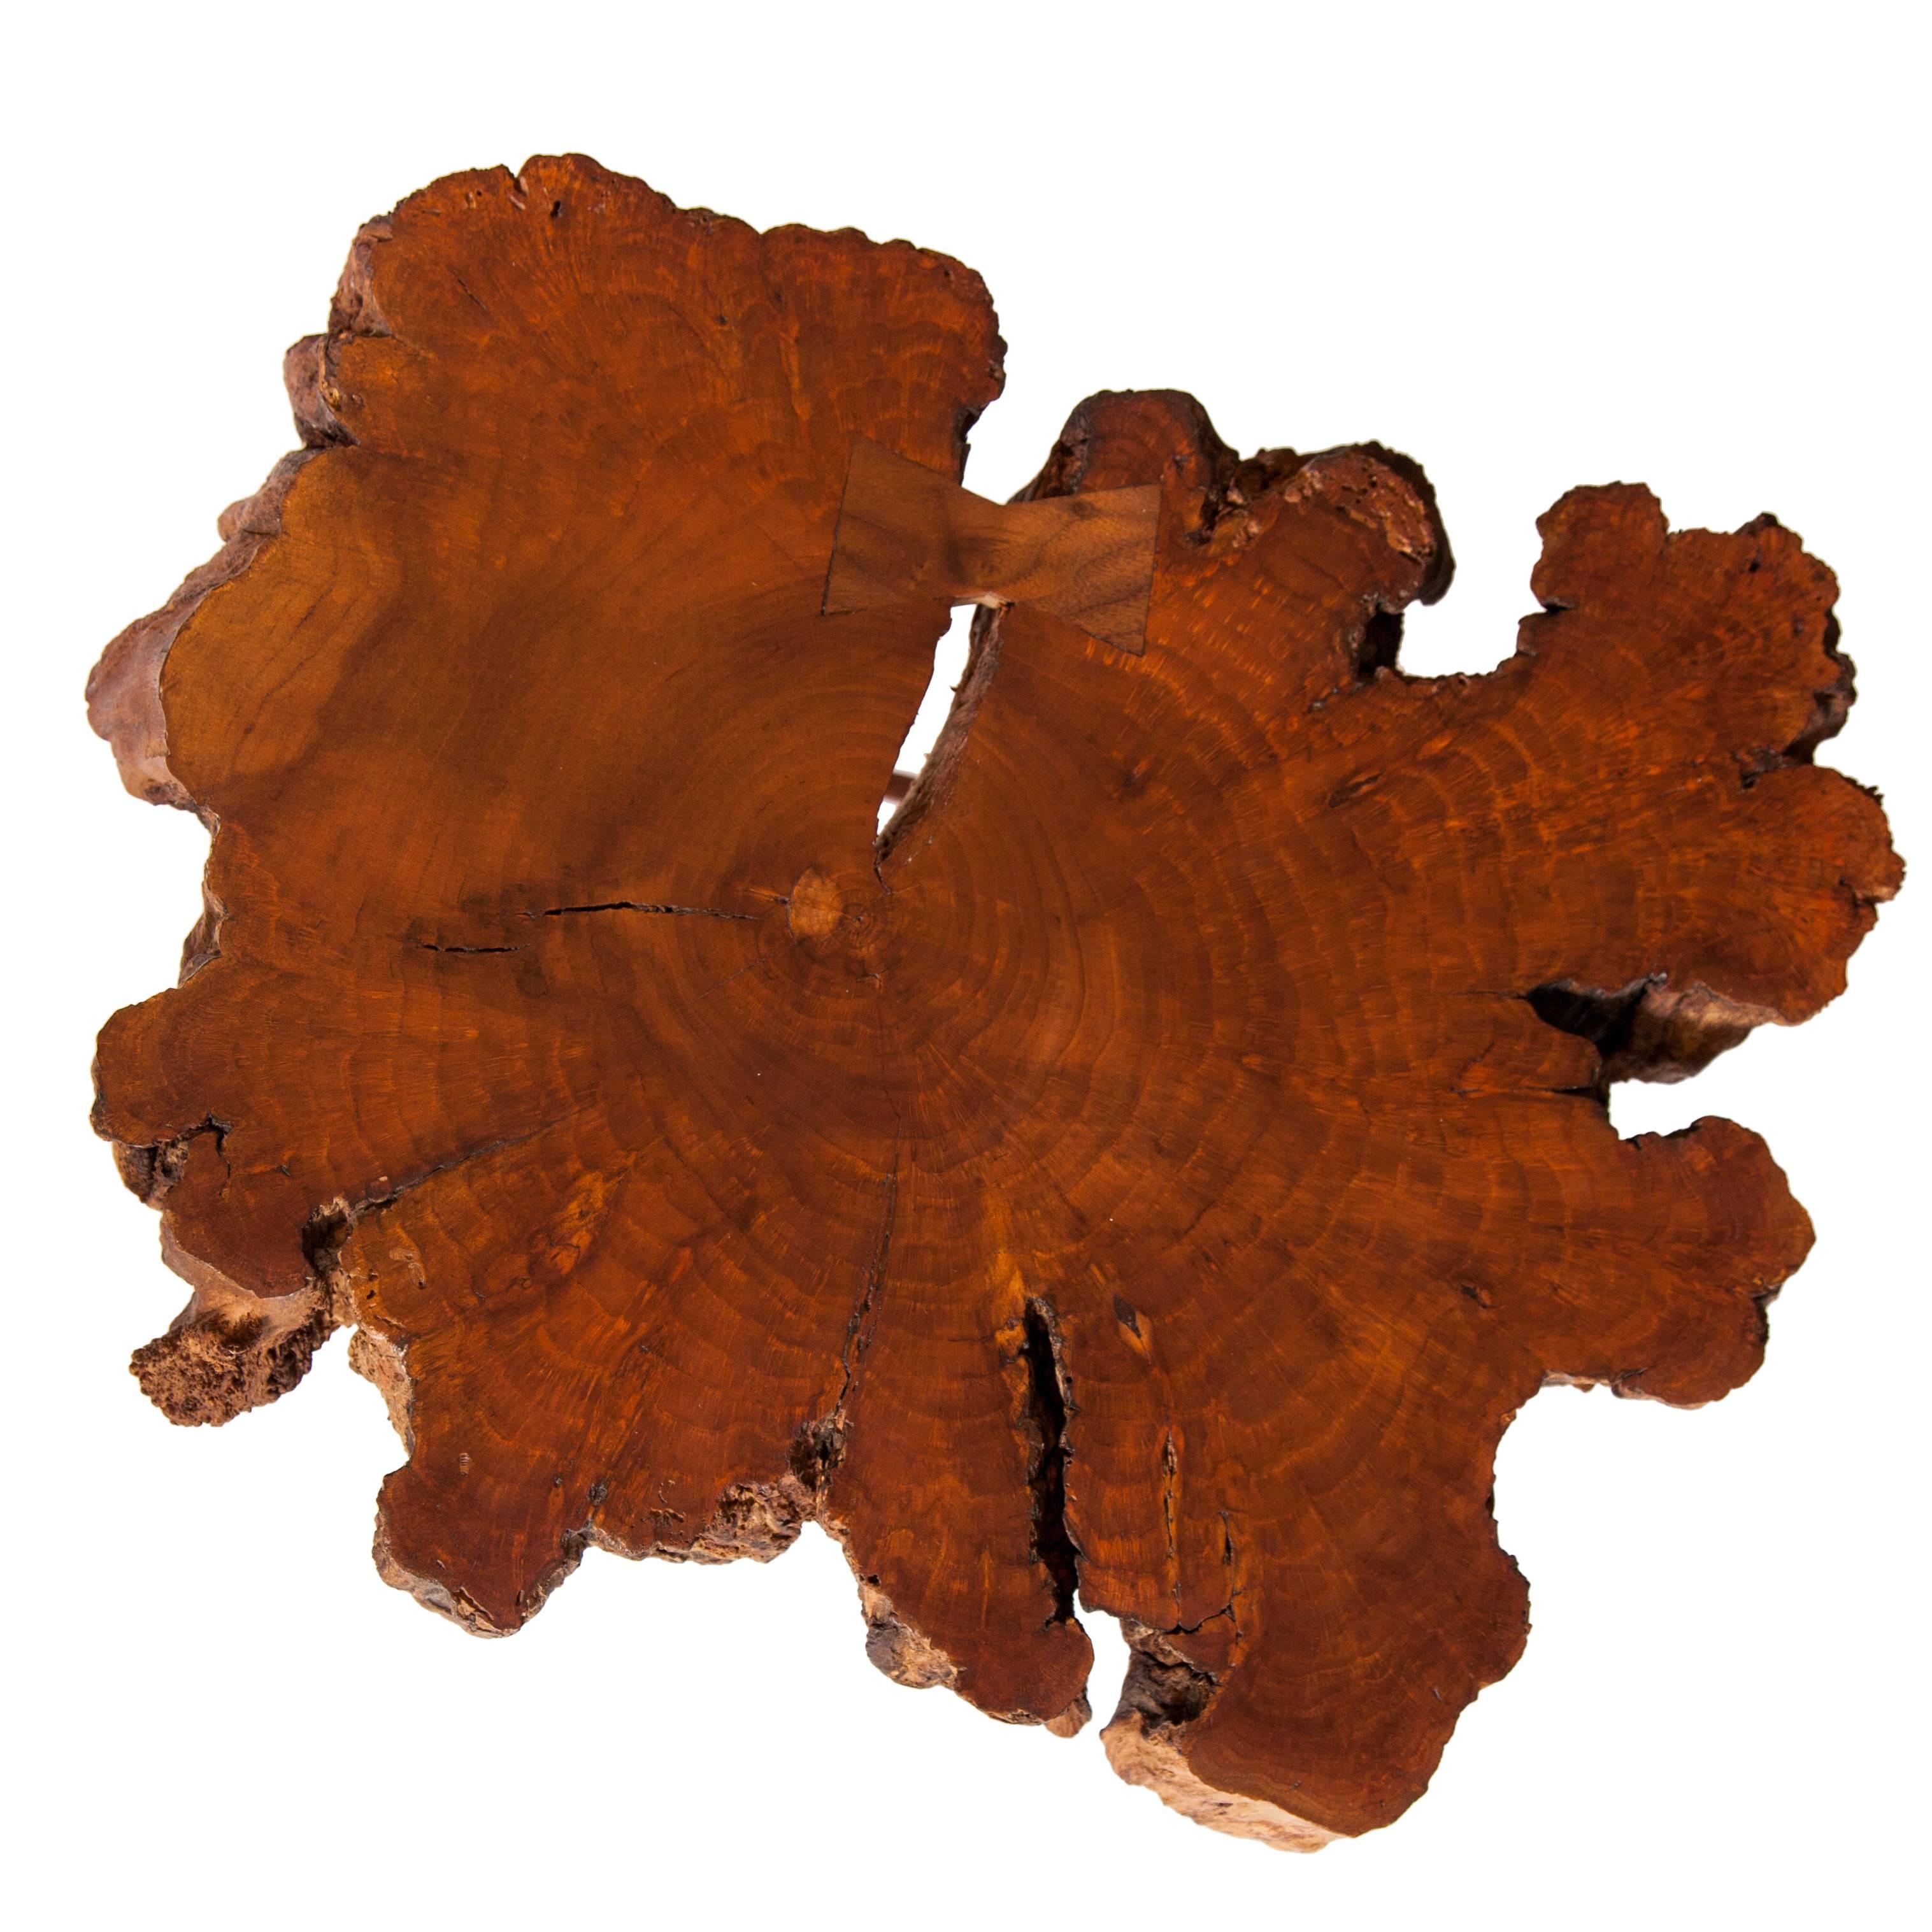 Cherrybomb tables by Don Howell circa 2010 from solid cherry burl stump cut slabs with Walnut butterflies and walnut base.